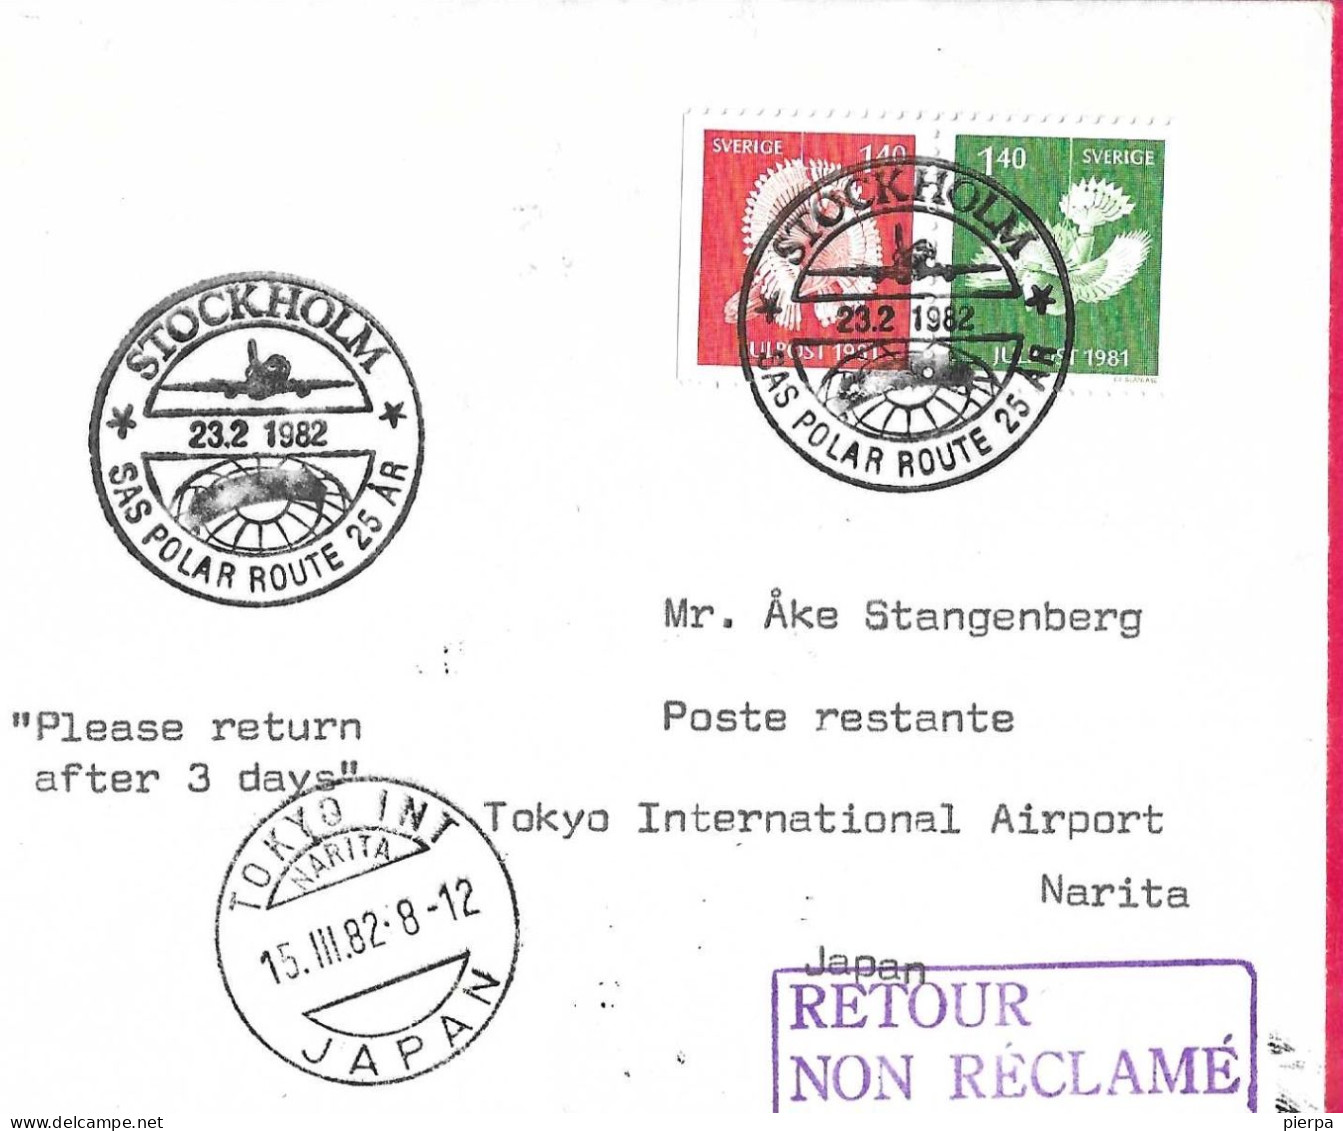 SVERIGE - SAS POLAR ROUTE 25 AR - FROM STOCKHOLM TO TOKYO * 23.2.1982* ON COVER - Covers & Documents